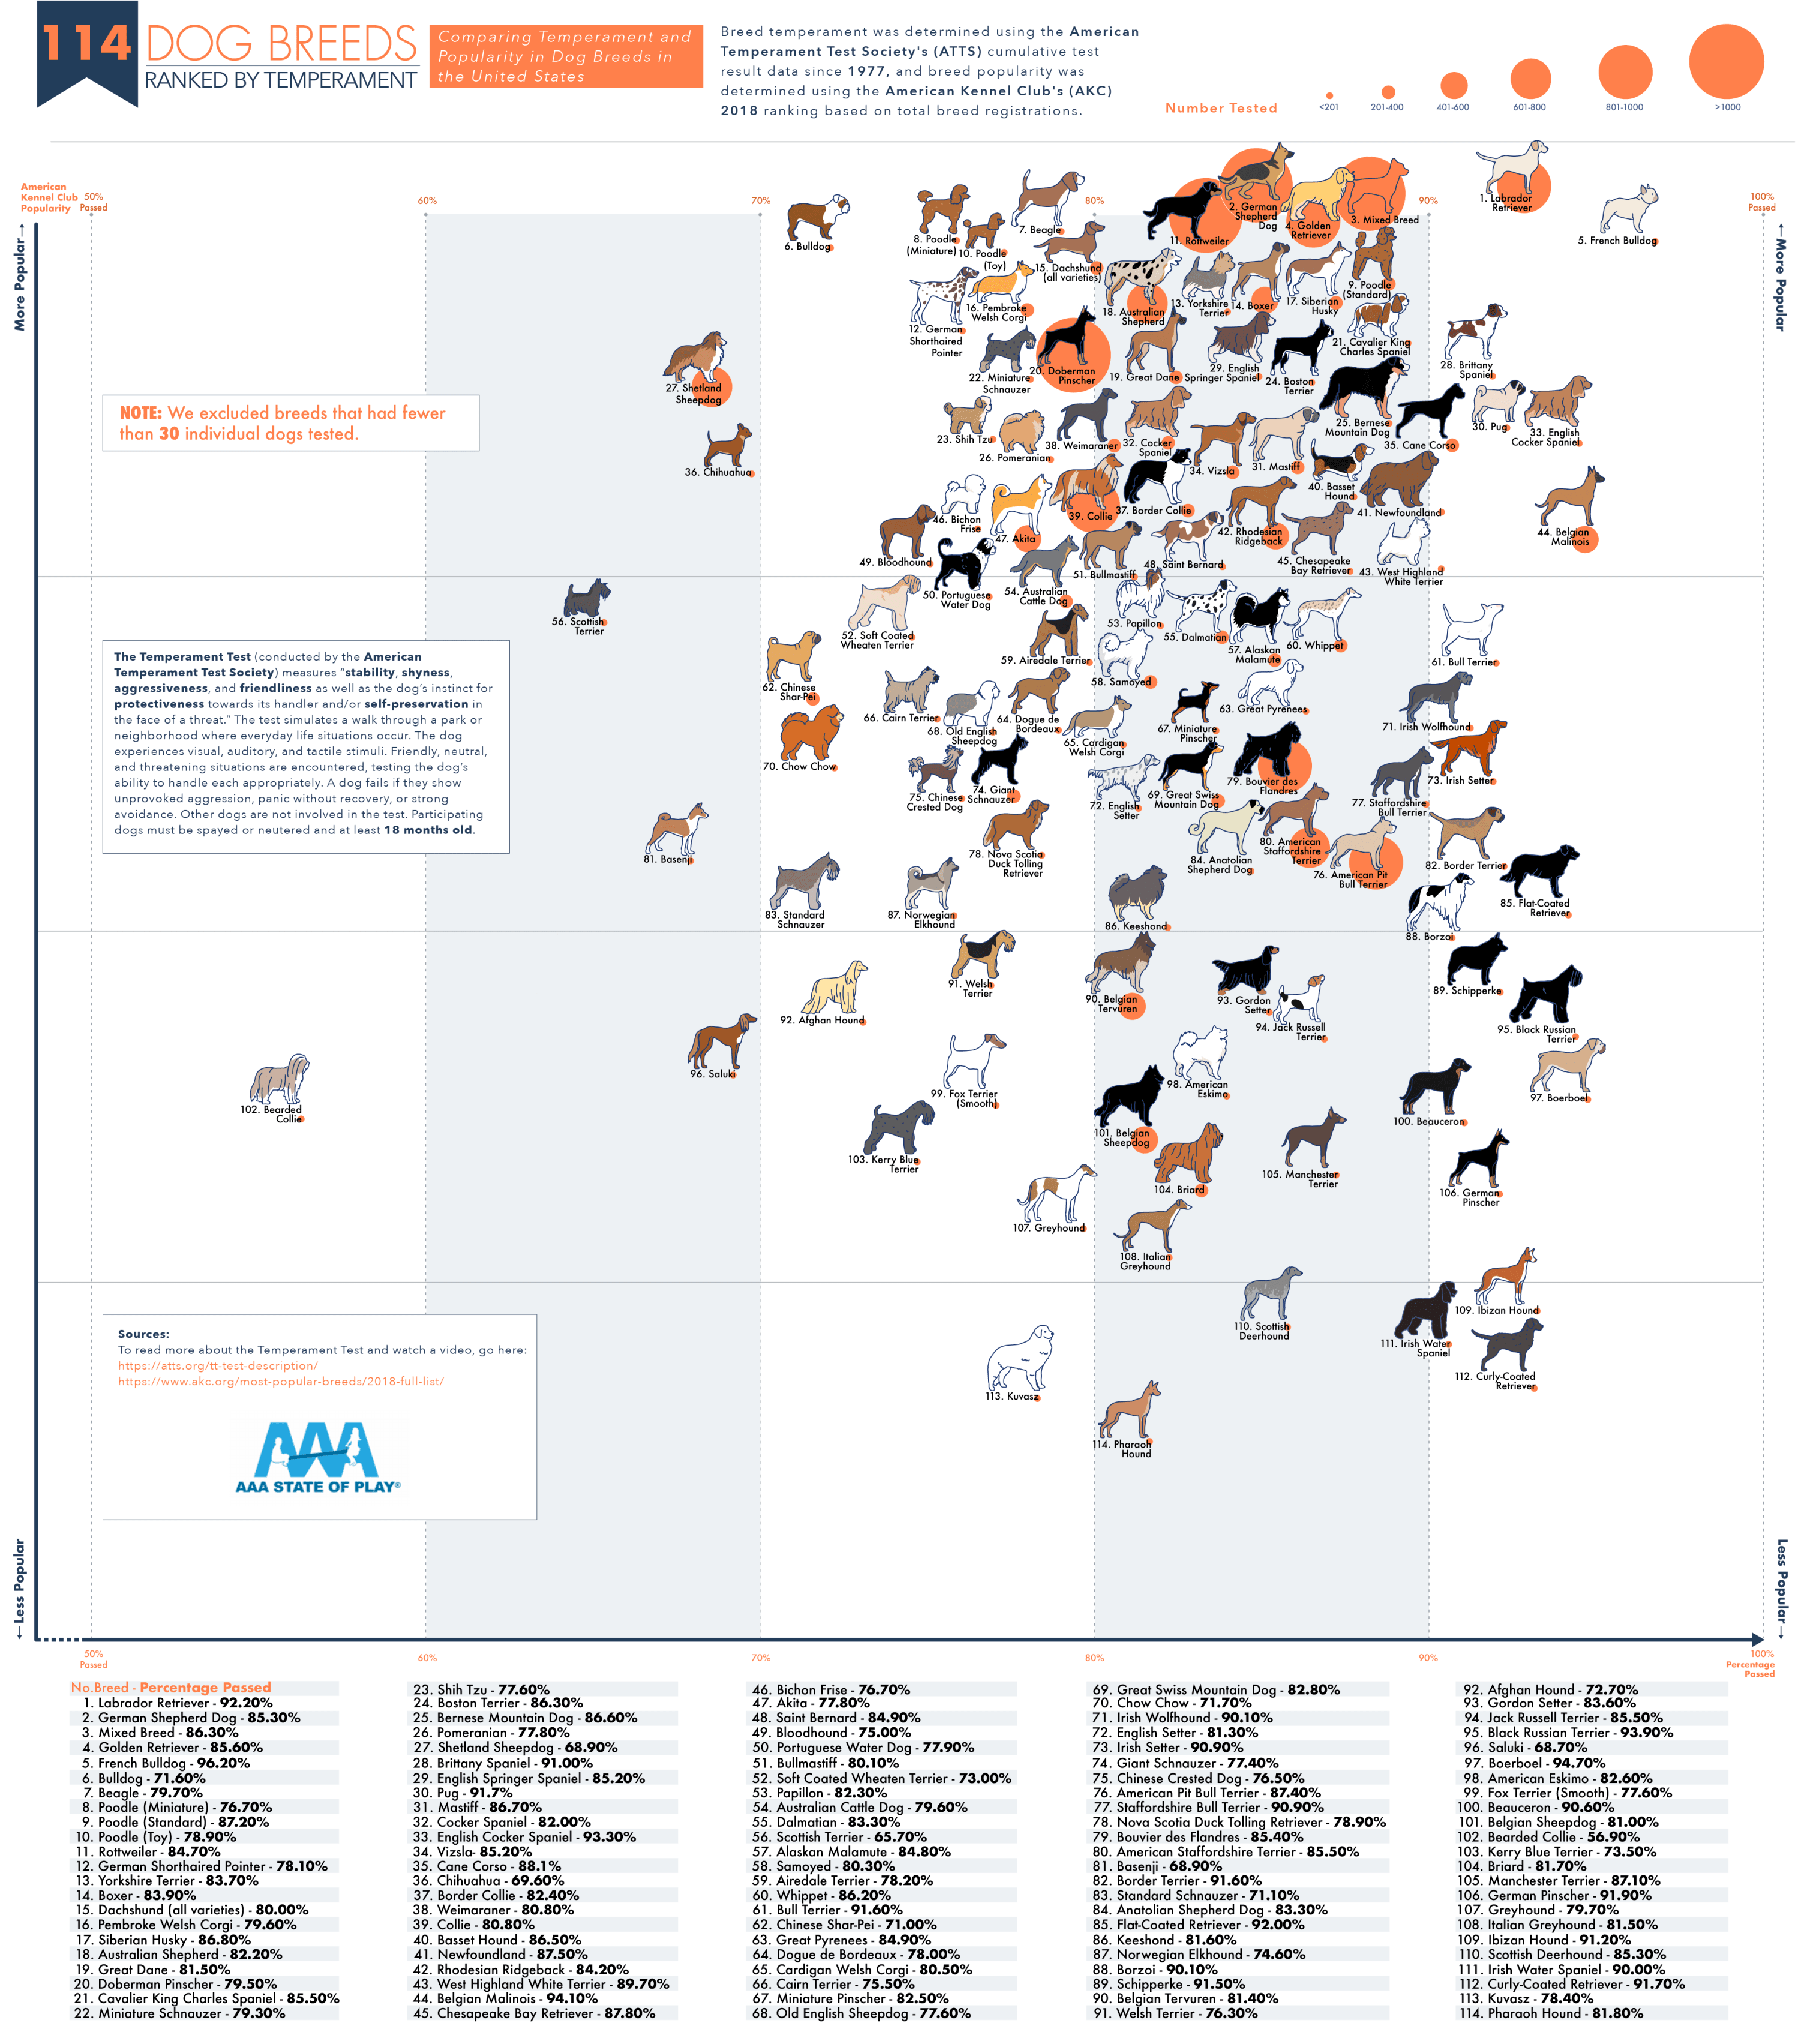 114 Dog Breeds Ranked By Temperament